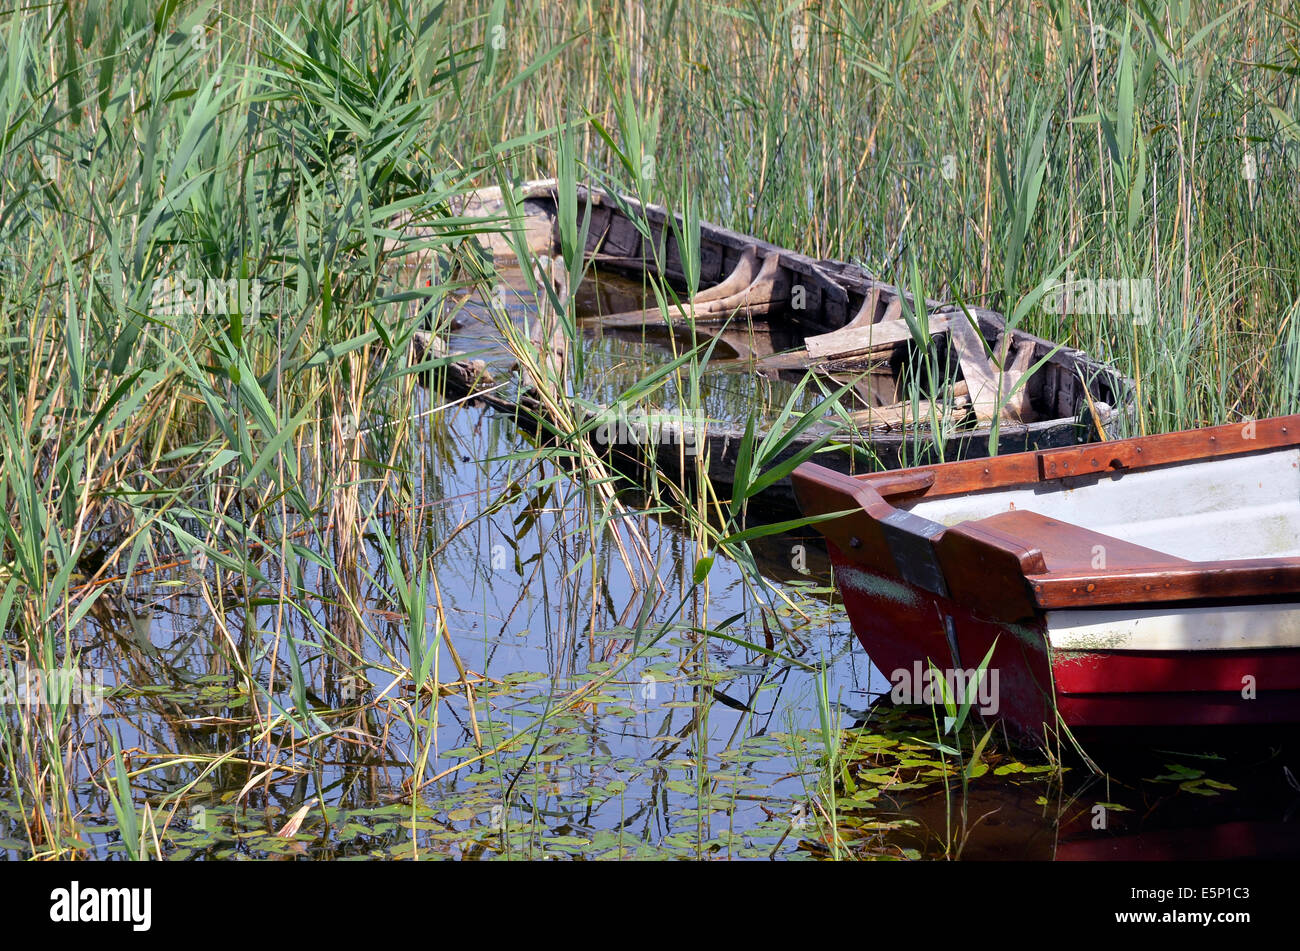 Sunken rowing boat abandoned in the reeds at Lisloughery Pier, Cong on the shores of Lough Corrib, Ireland. Stock Photo